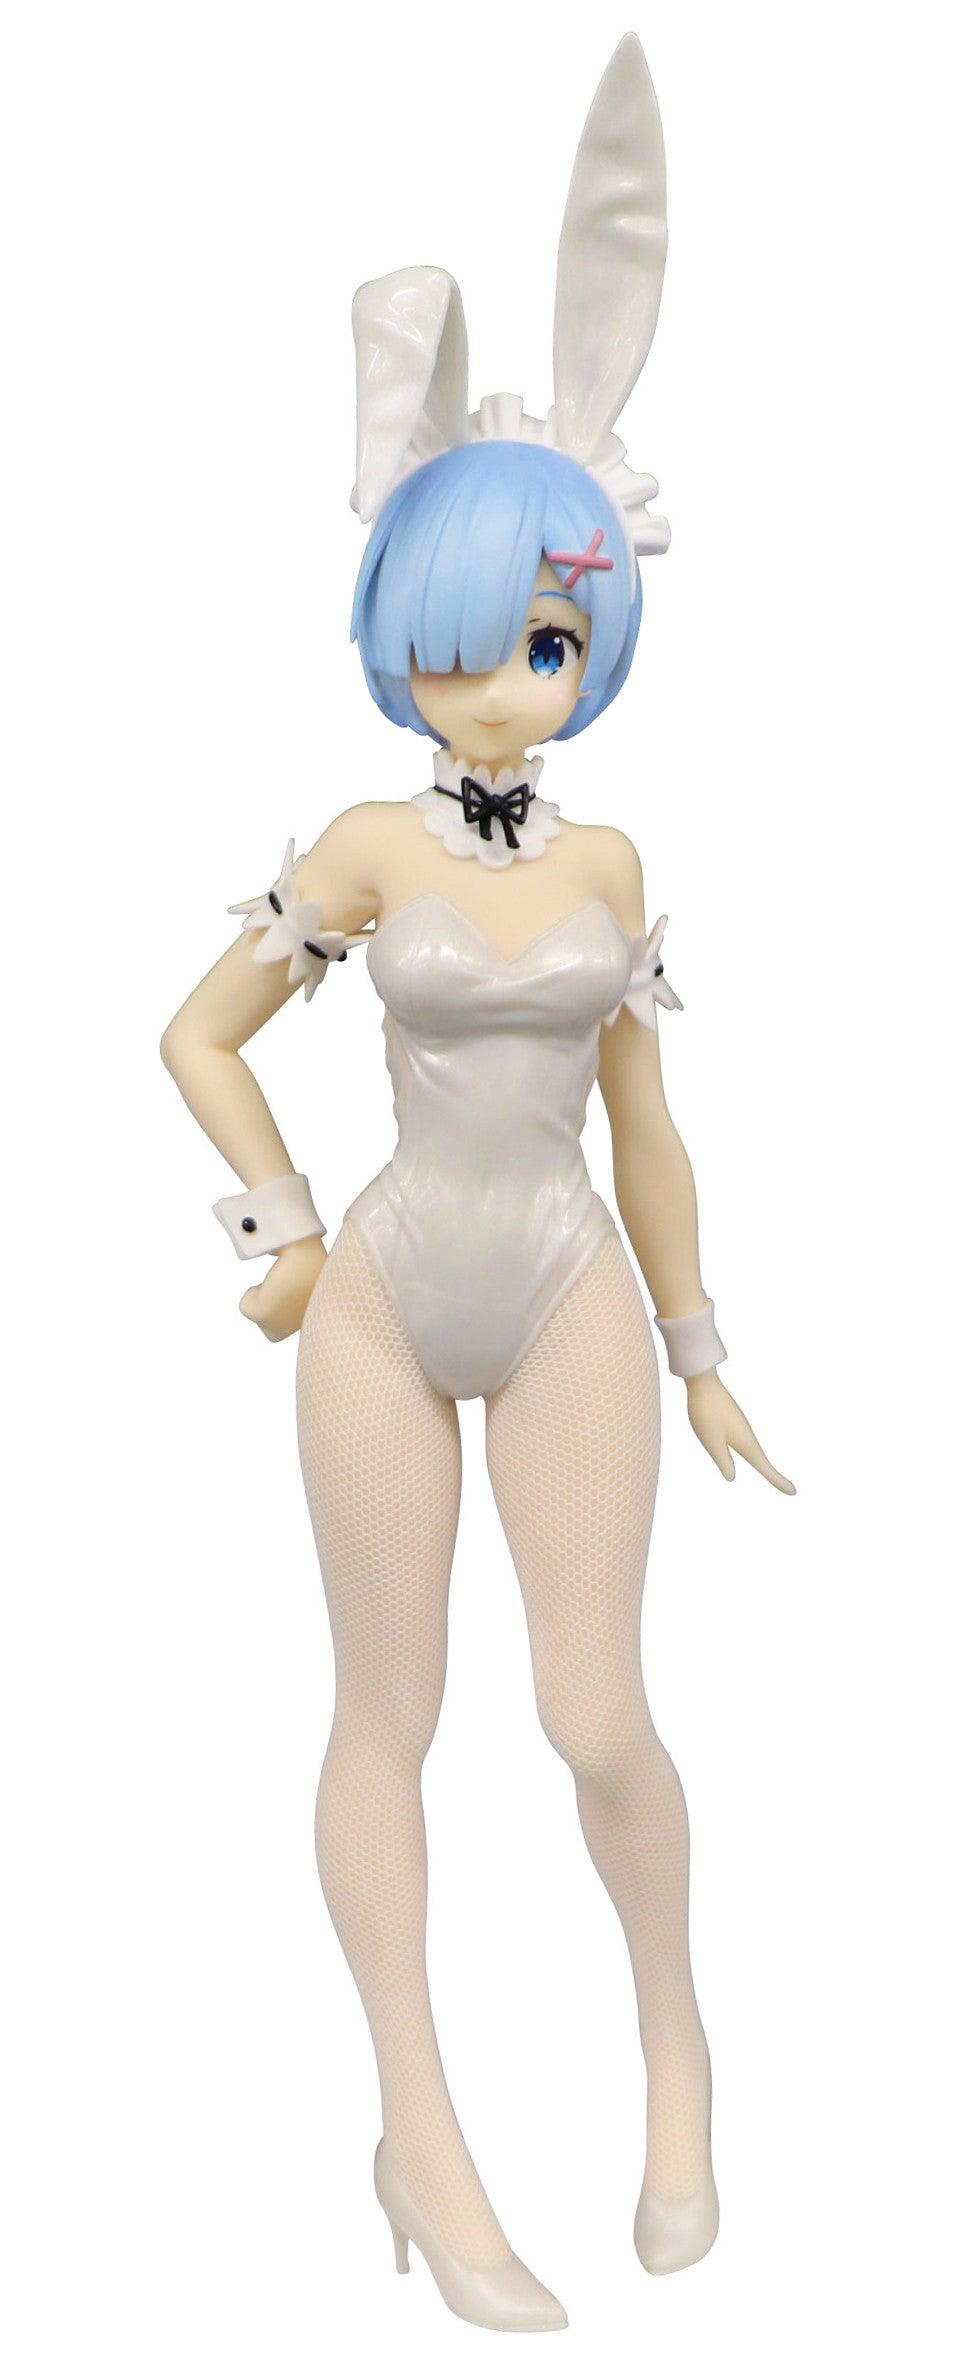 VR-98051 Re:ZERO Starting Life in Another World BiCute Bunnies Figure Rem White Pearl Color Version - Good Smile Company - Titan Pop Culture